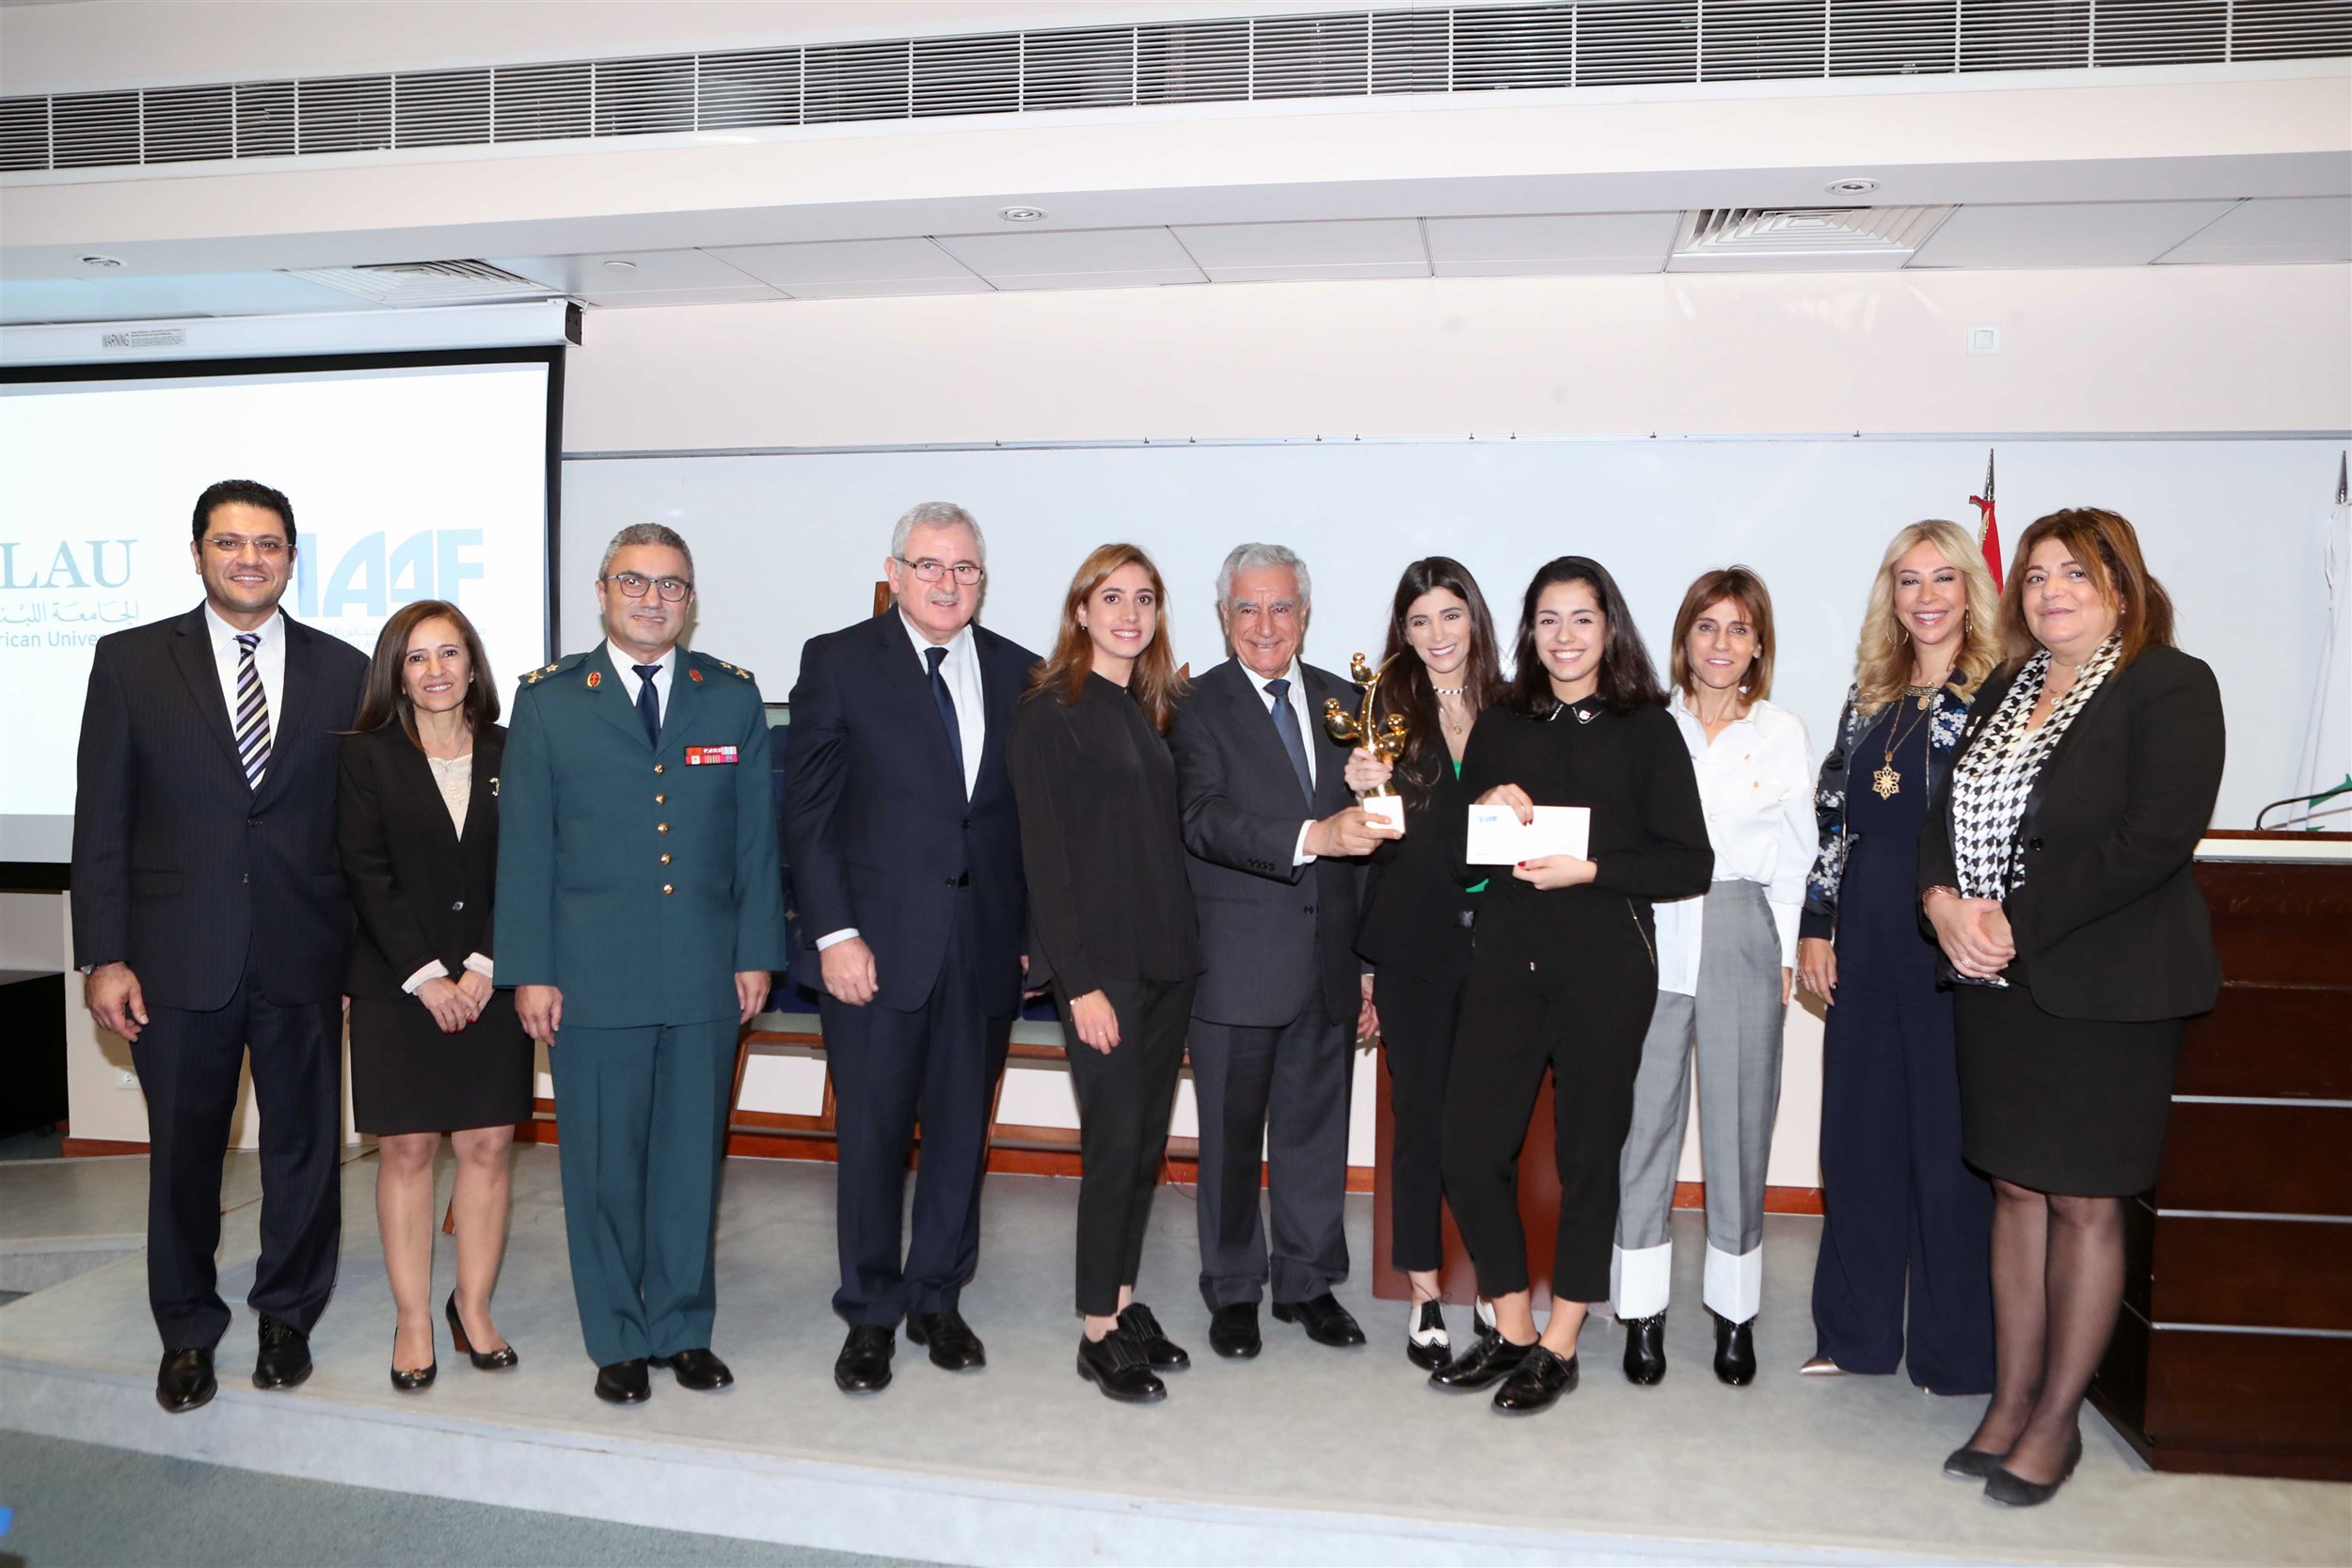 the winners of the beirut campus iaaf awards claiming their trophy for their project “lmn” that empowers people with special needs through providing them with job opportunities and teaching them handmade clothing that challenges traditional wear.